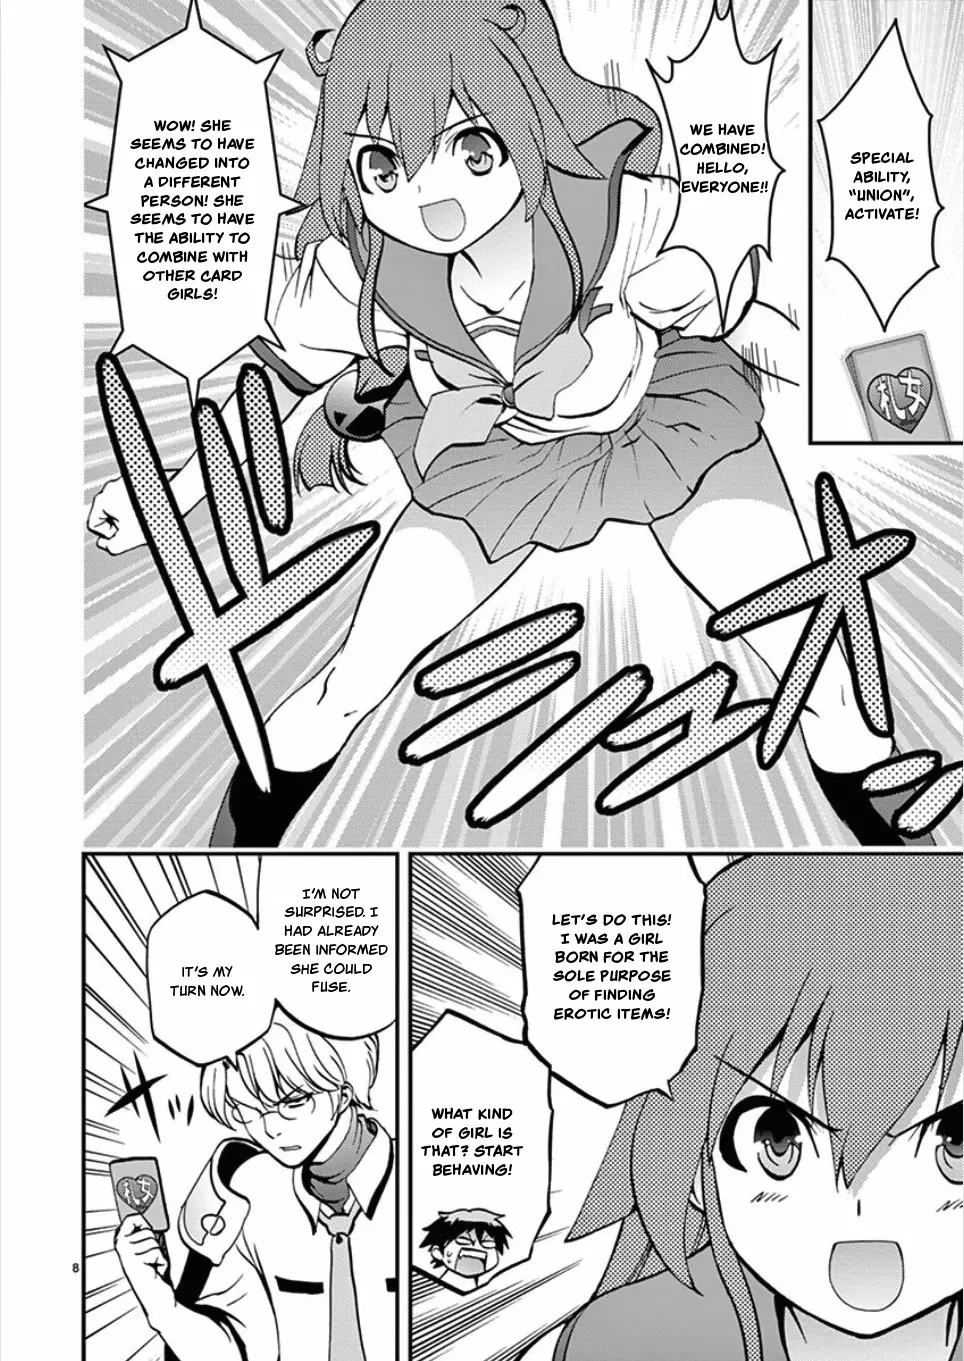 Card Girl! Maiden Summoning Undressing Wars - 56 page 8-8392af01